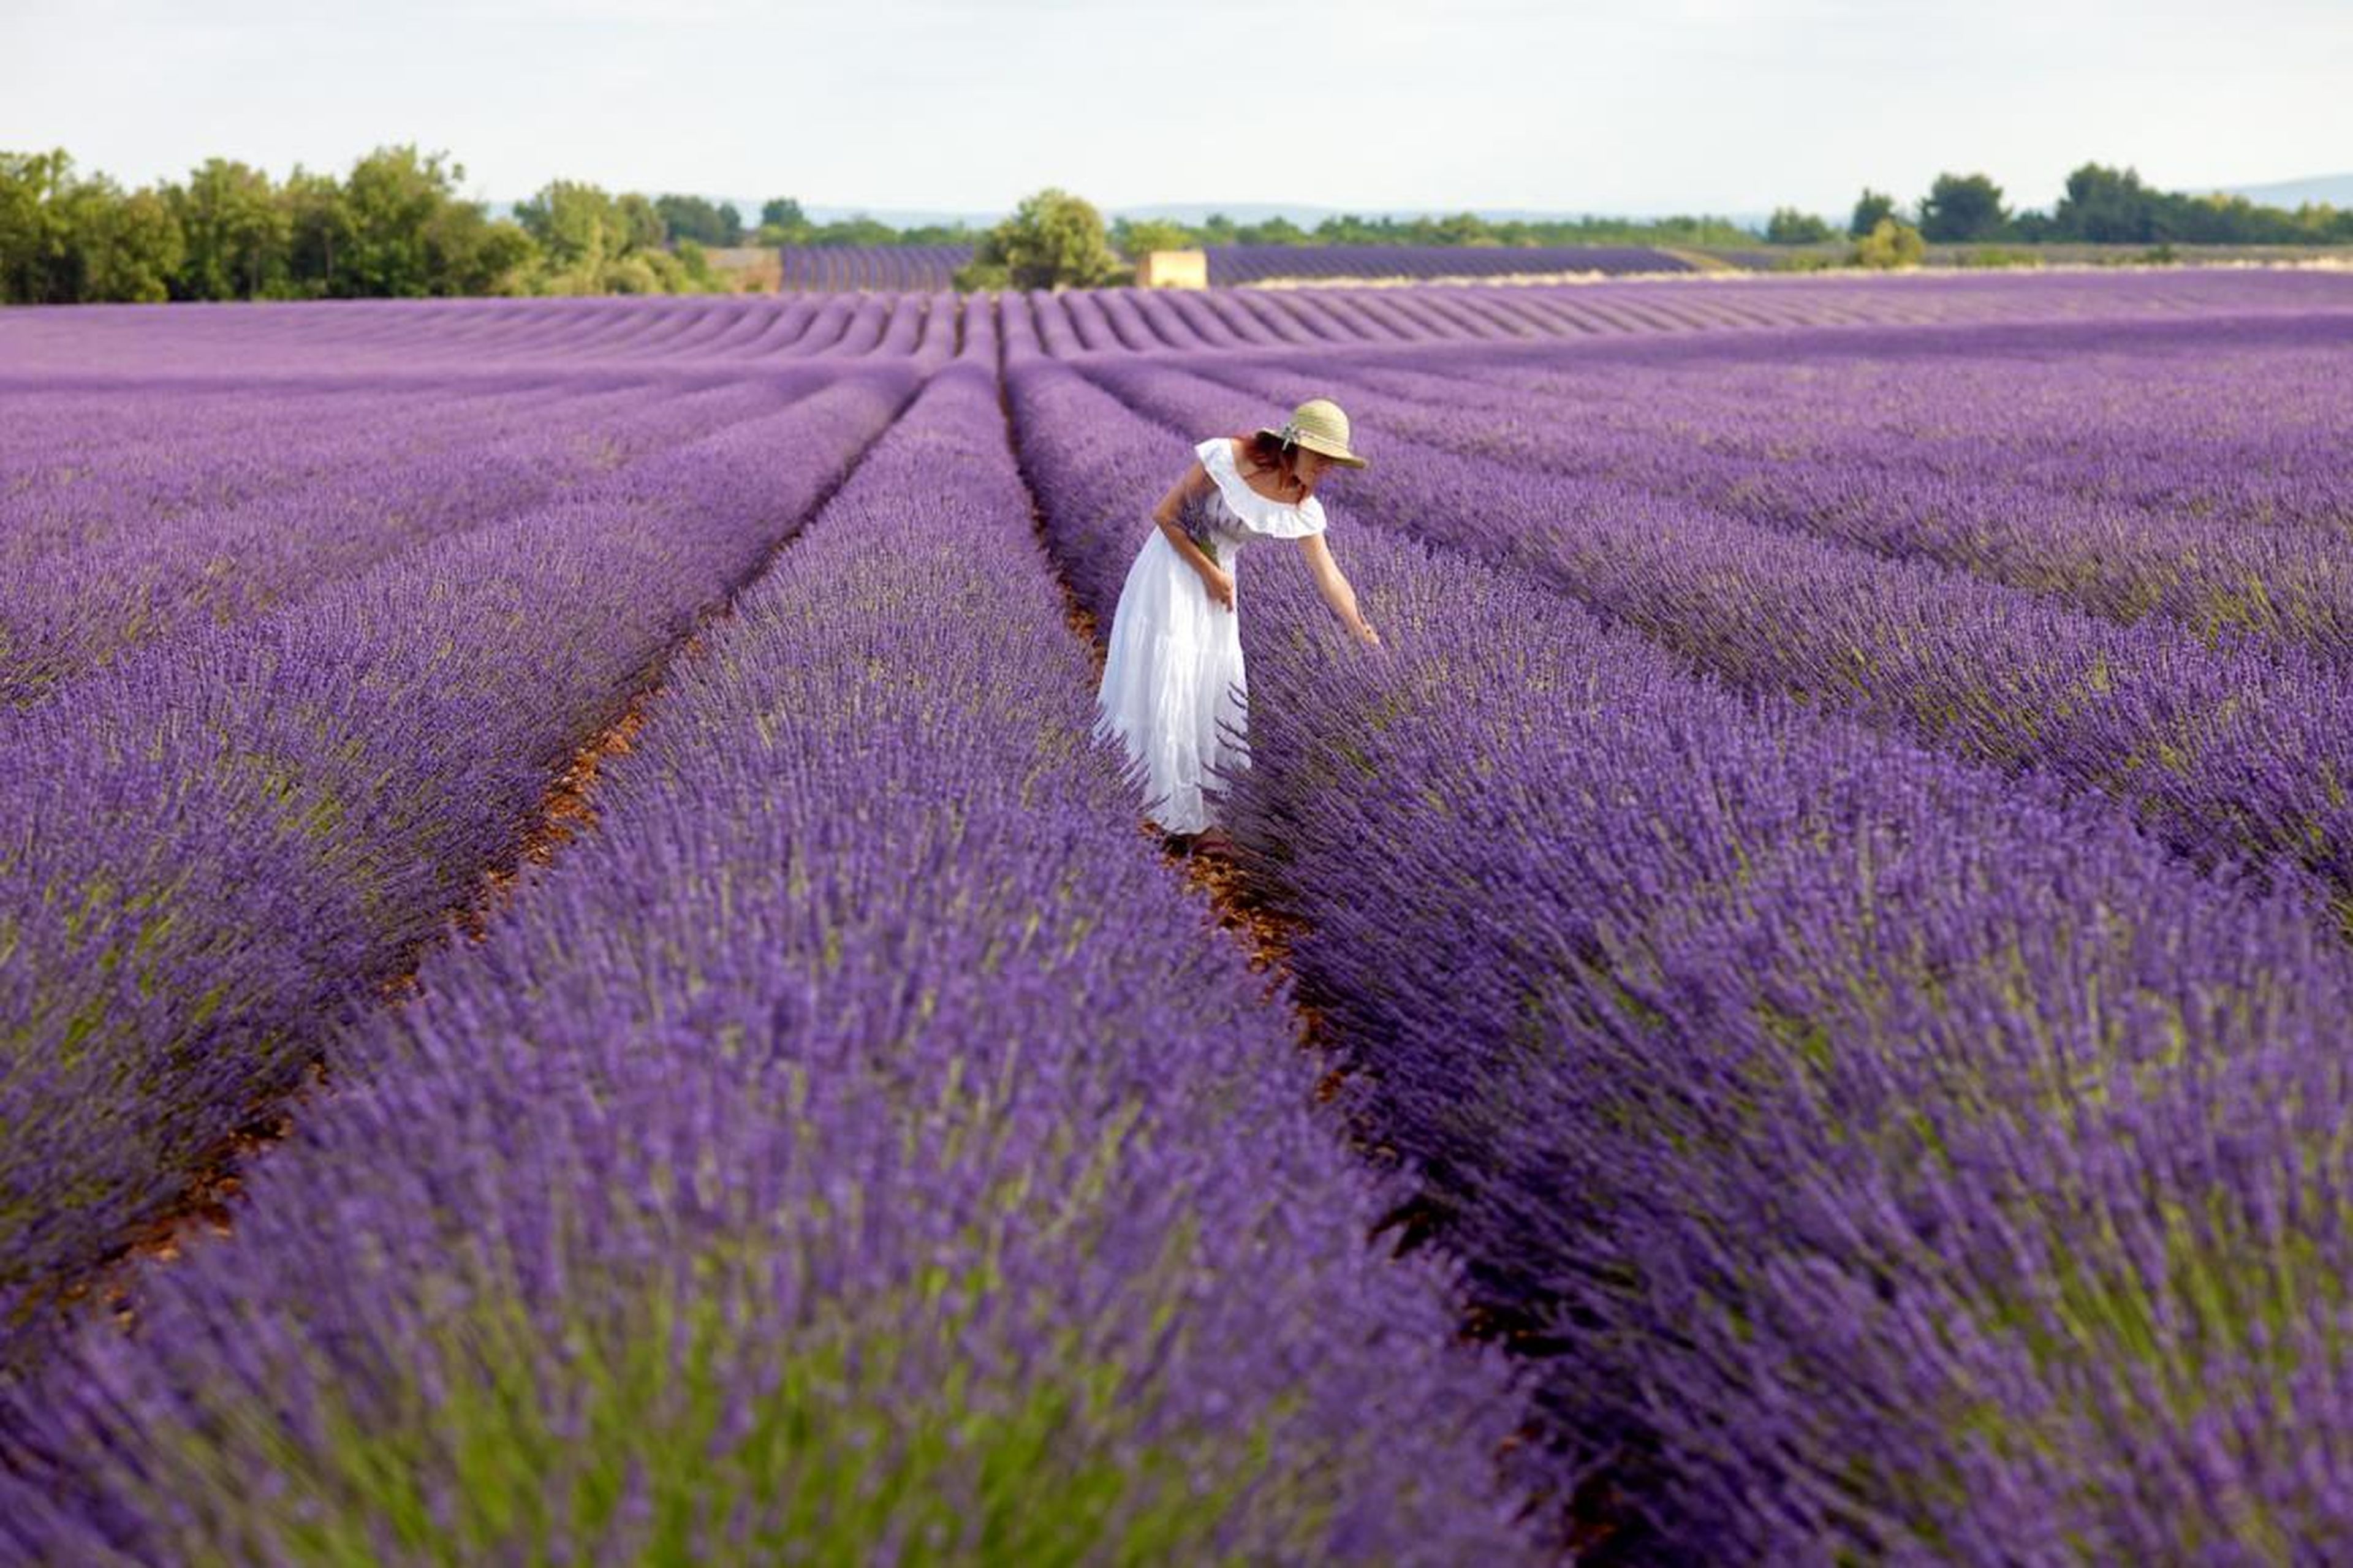 Lavender farmers in England appreciates the Instagram photo takers who pay to visit their land, but they complain that it gets too overcrowded on the weekends.